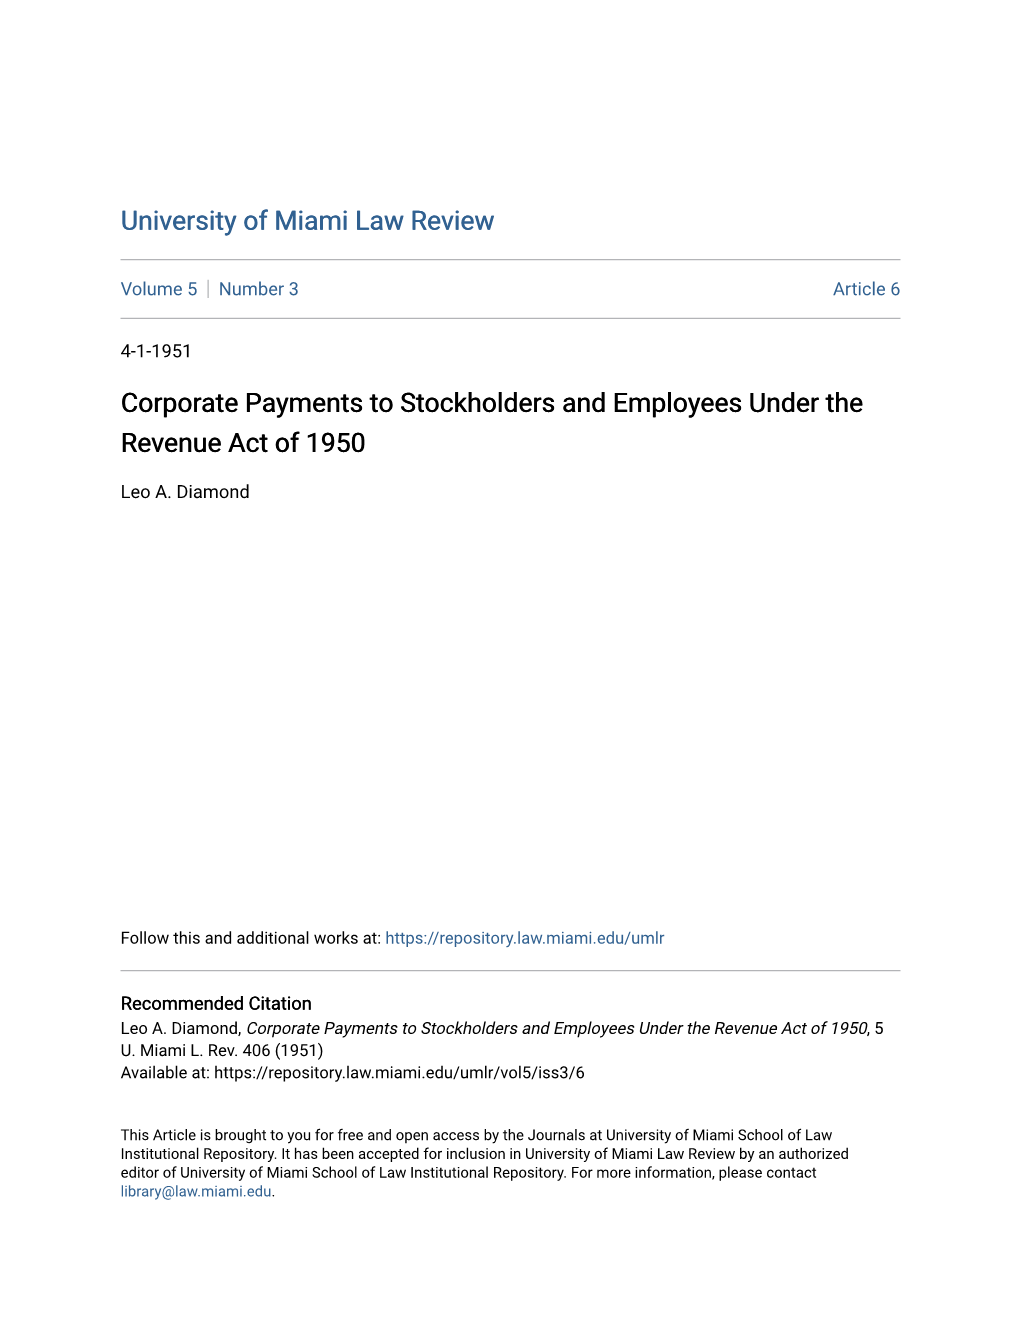 Corporate Payments to Stockholders and Employees Under the Revenue Act of 1950